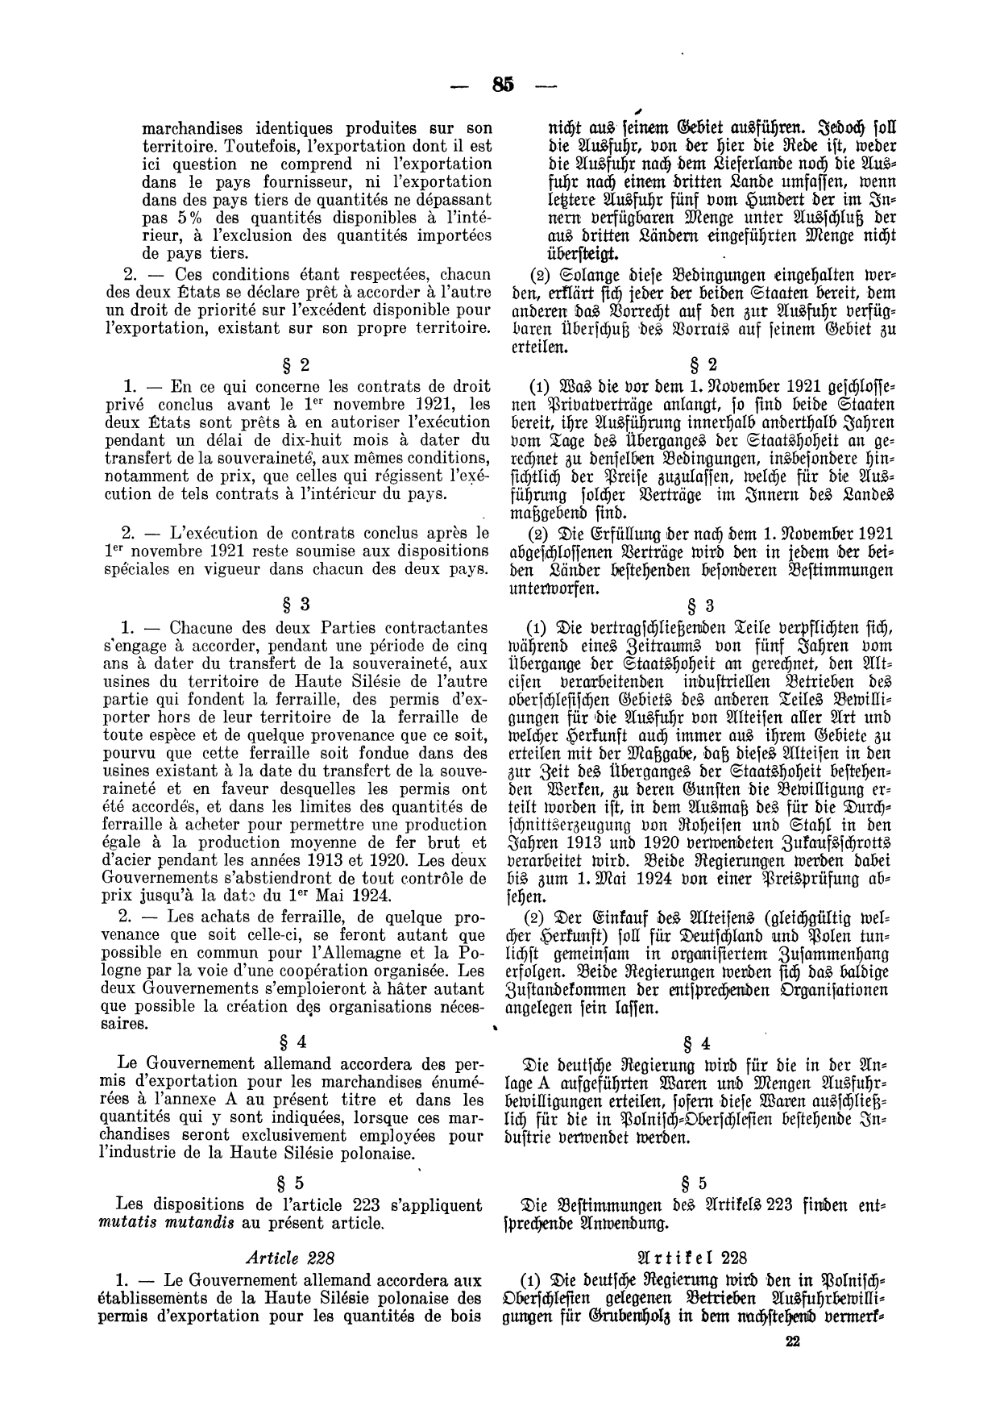 Scan of page 85